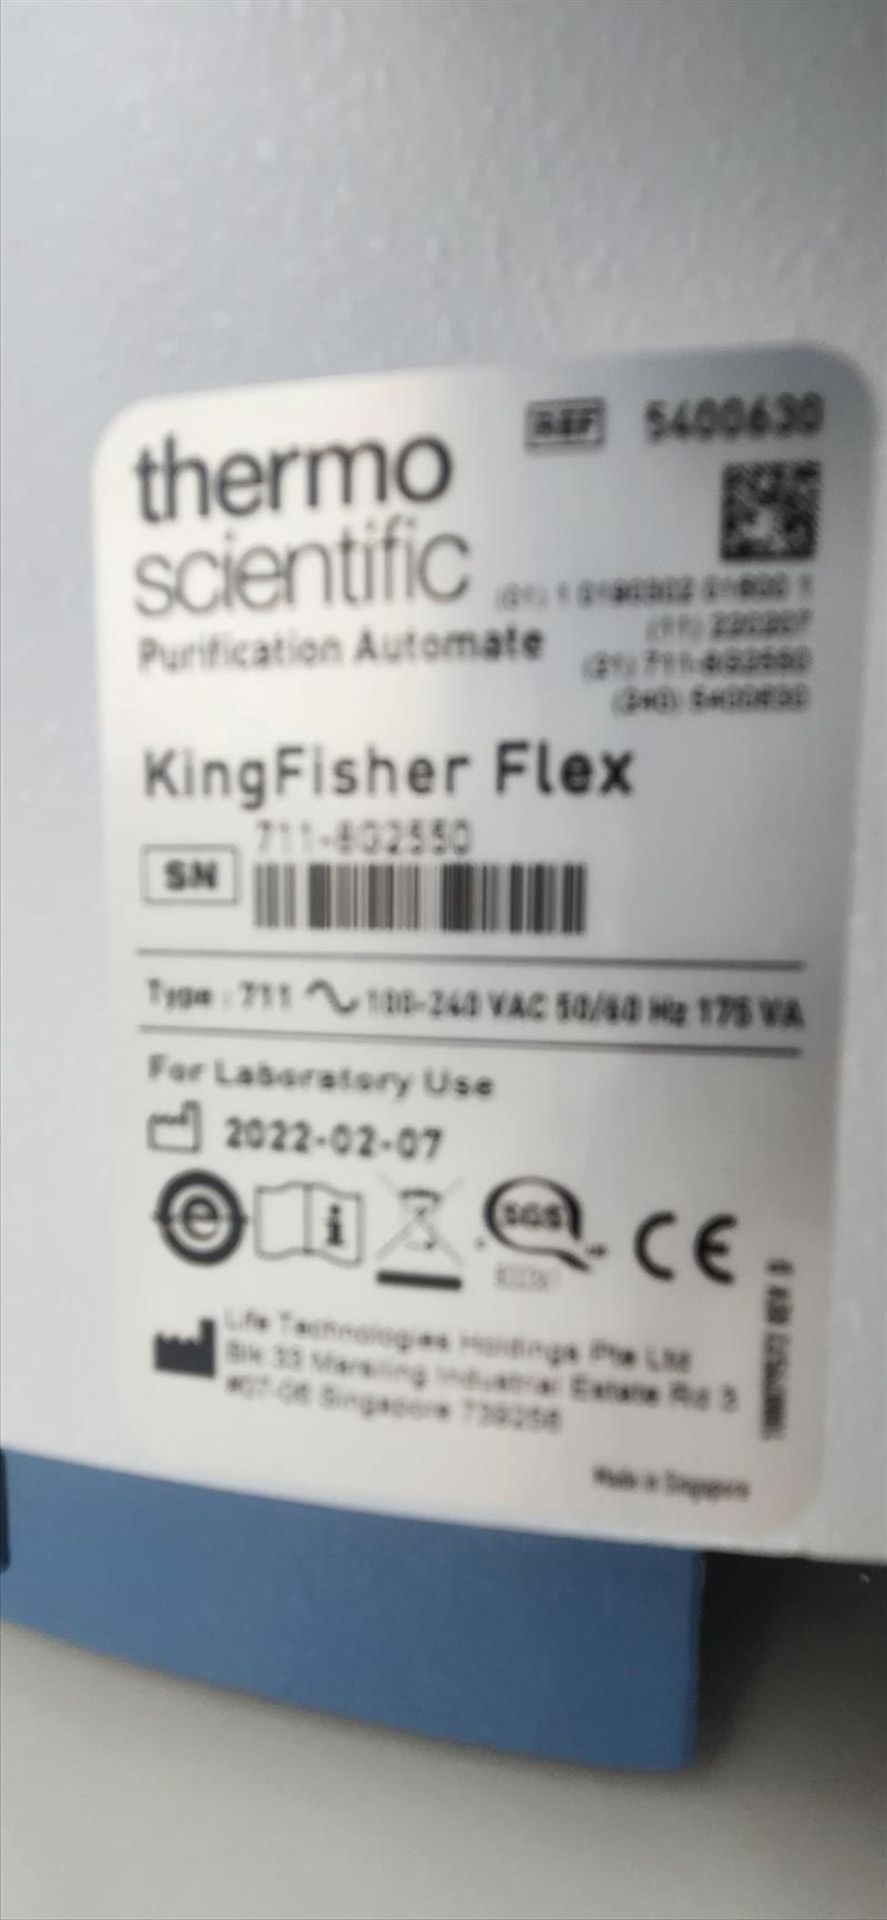 Thermo Scientific KingFisher Flex Purification System, Fully Automated, S/N 711-8G2550 - Image 4 of 4